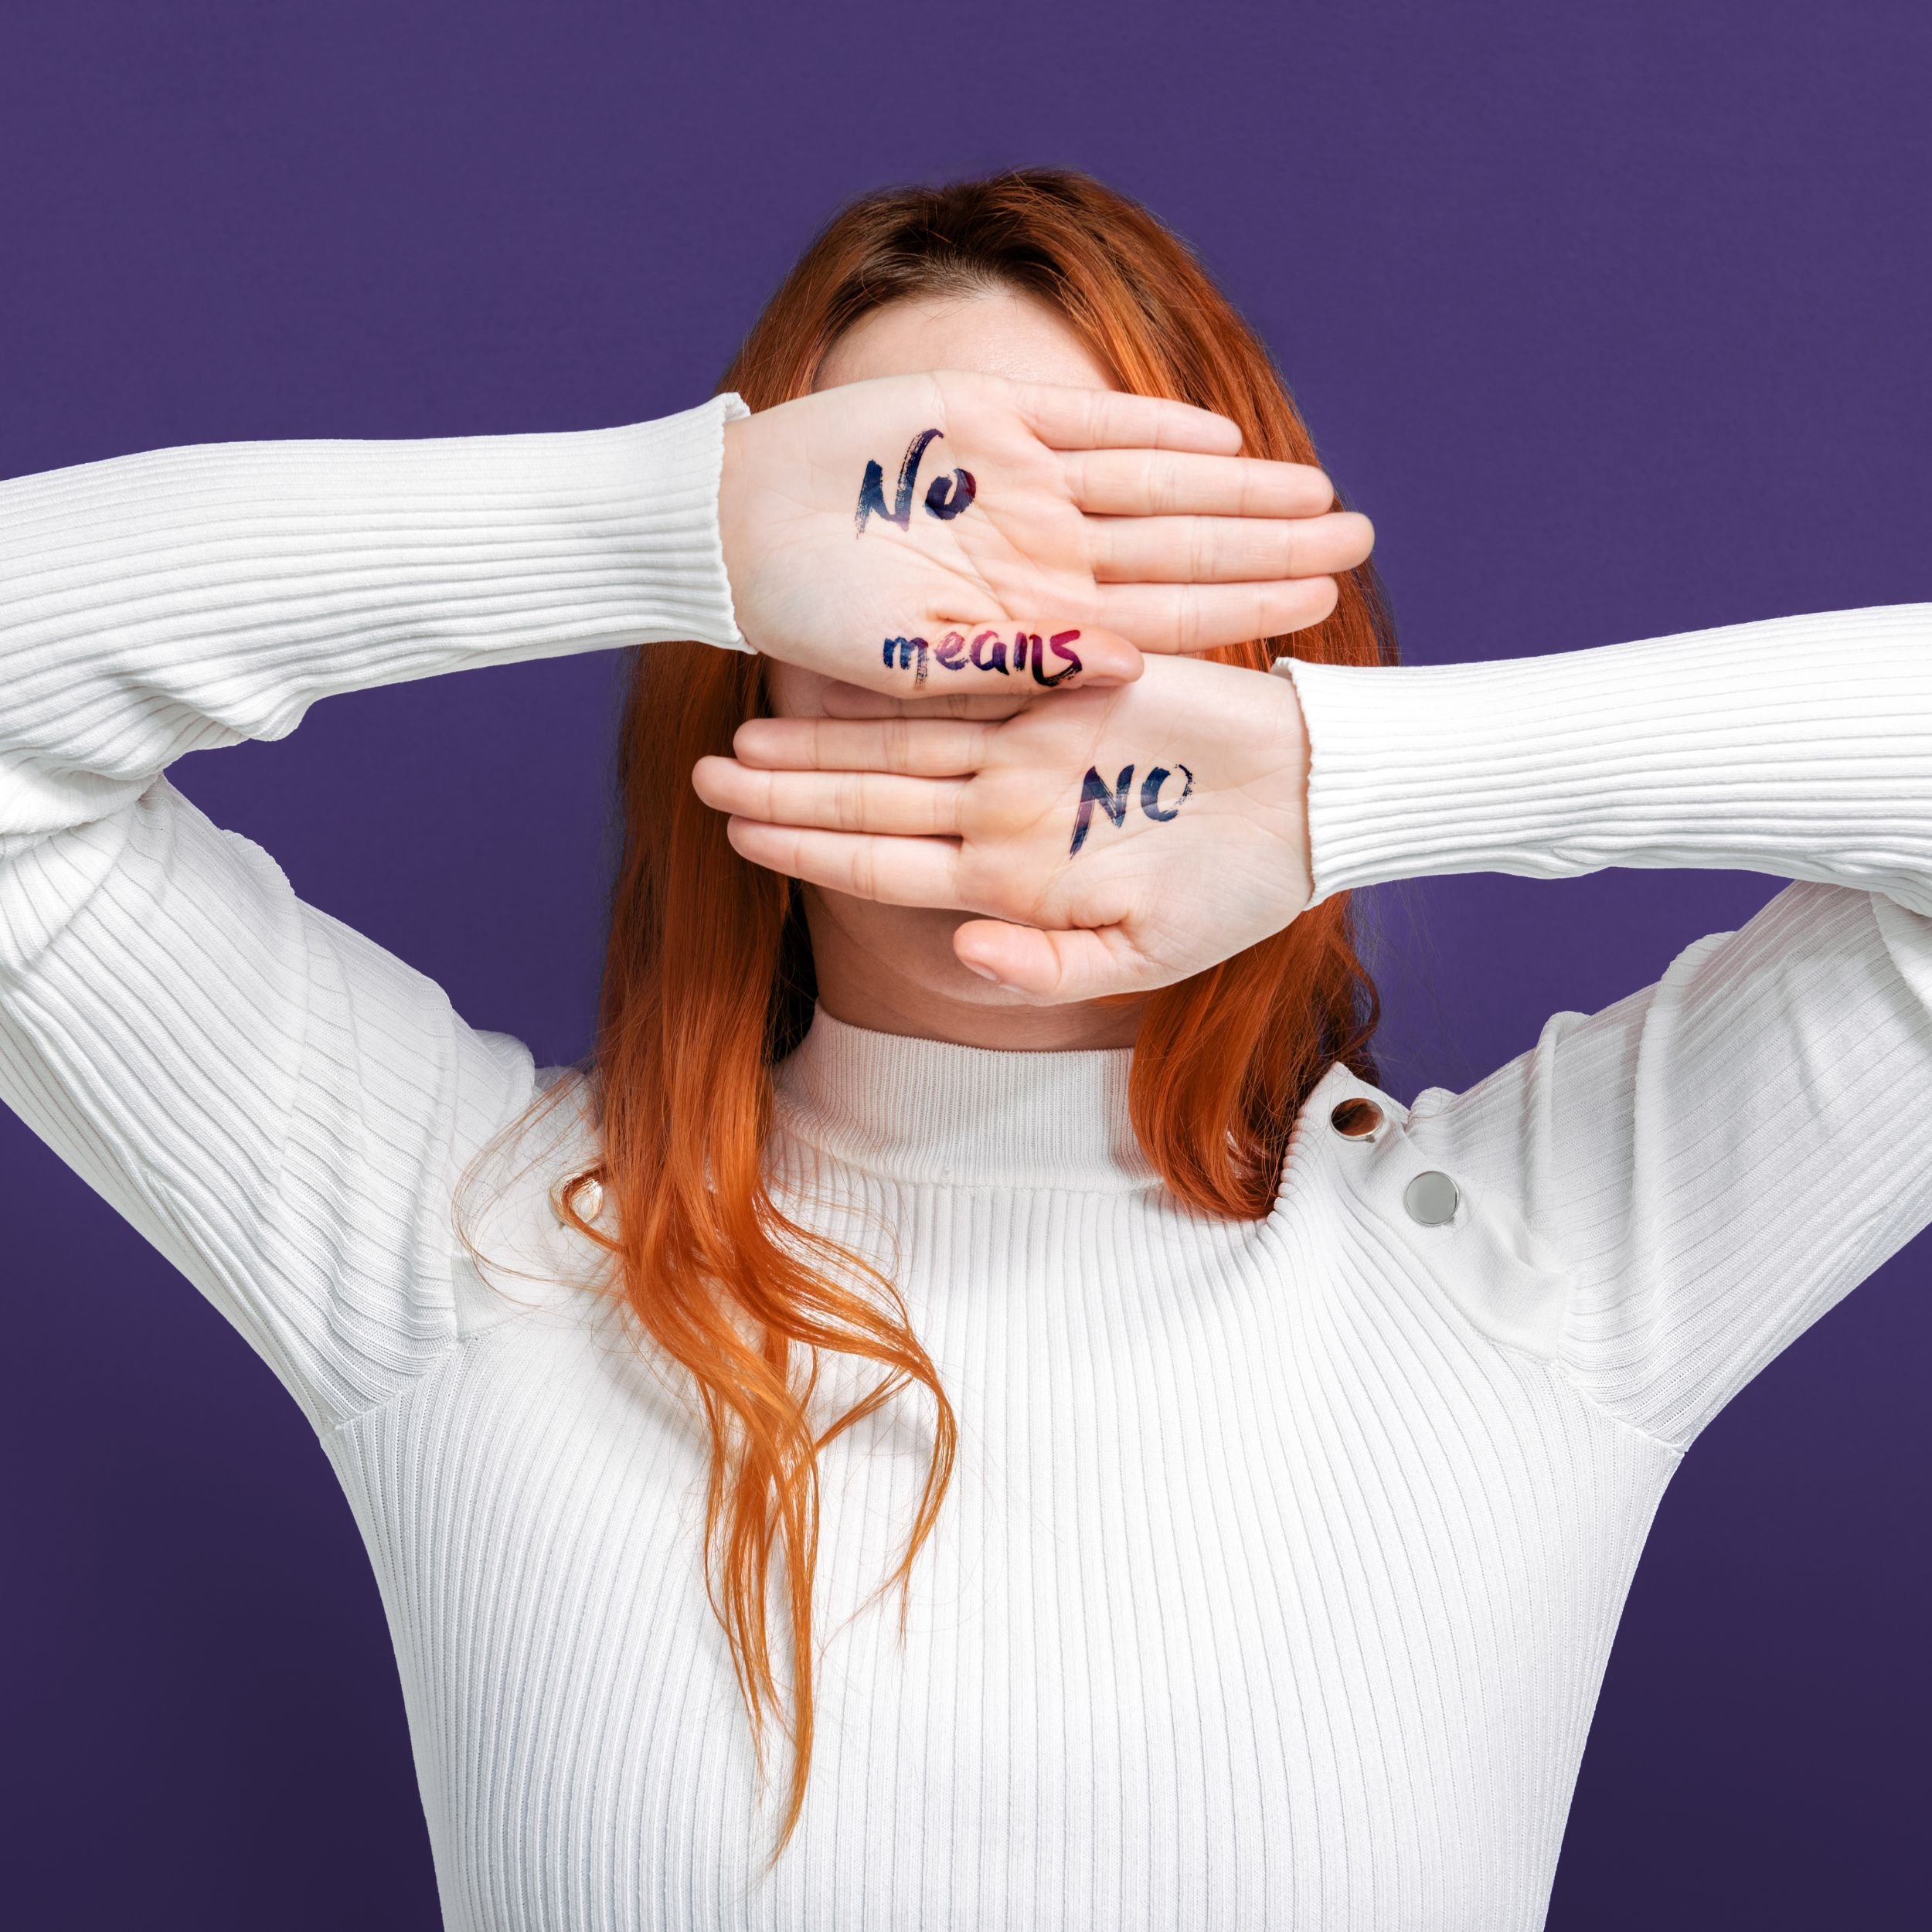 Woman with hands over face written on hands is no means no.jpg